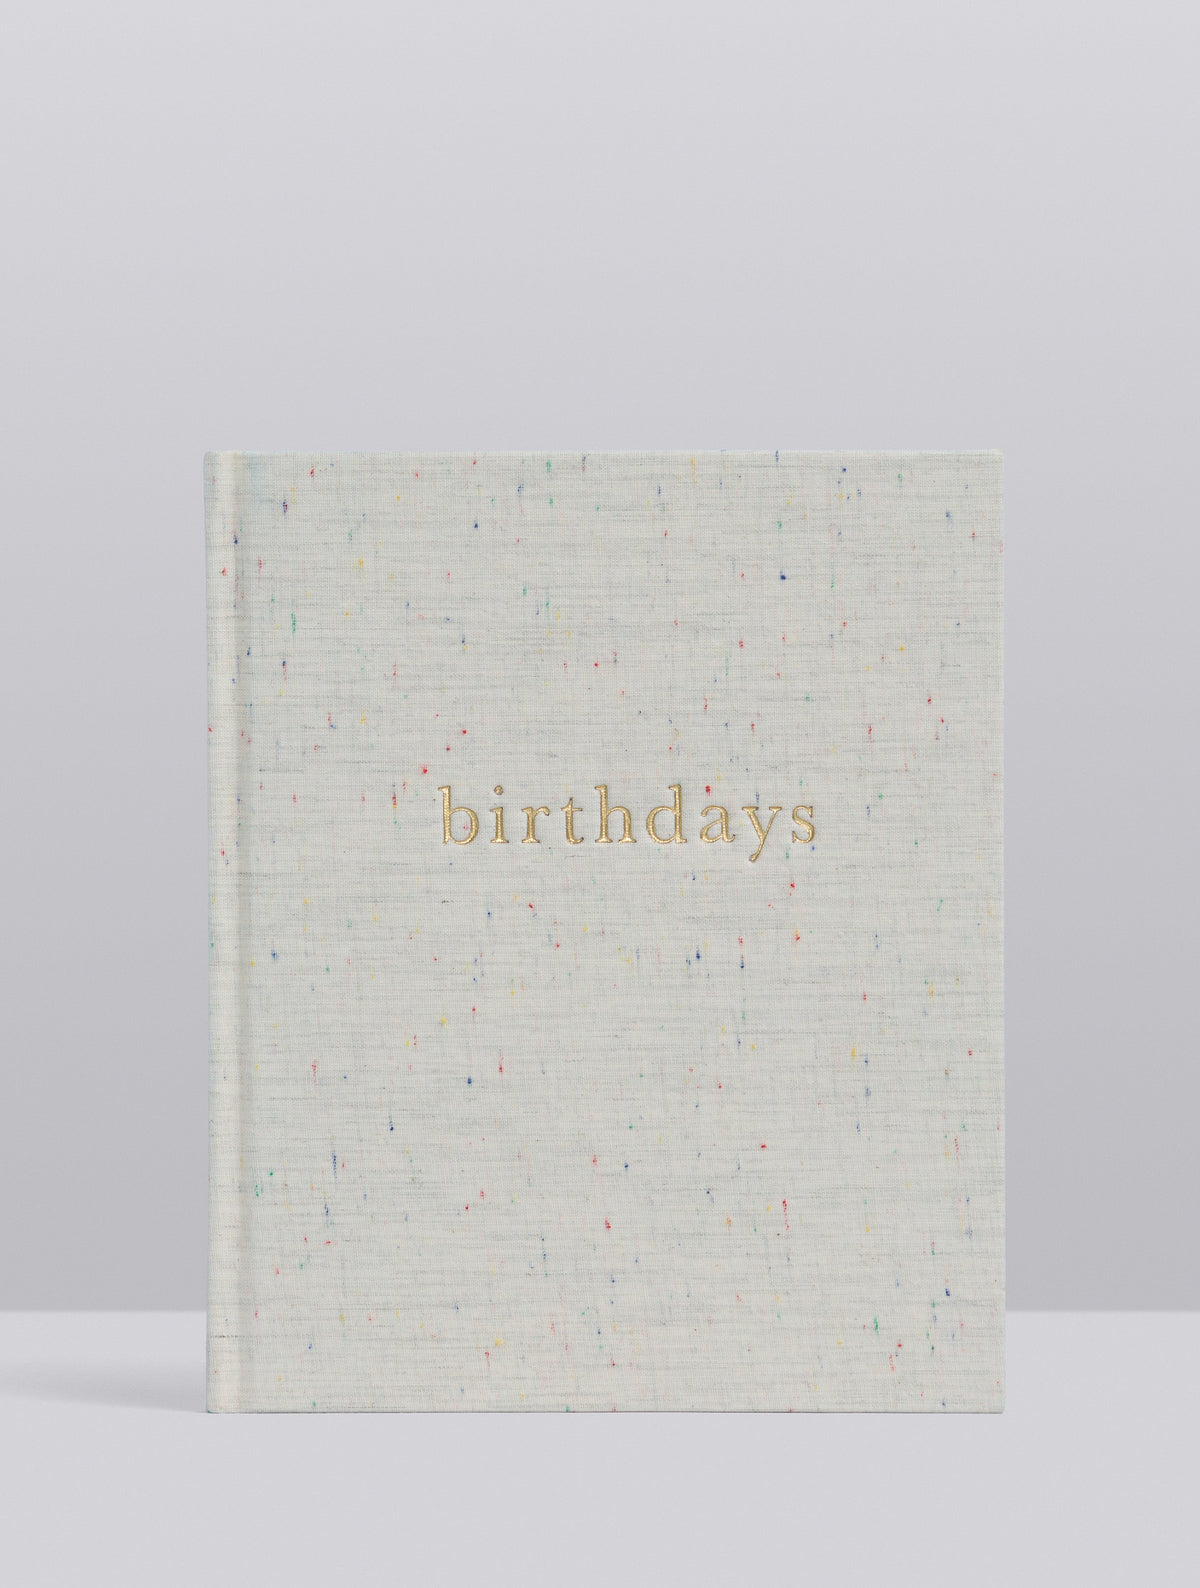 Happy Birthday Mom: Gift for Mom Lover, Mom Birthday Gift Notebook a  Beautiful,Blank Lined Journal birthday gifts Lined Notebook,Journal Gift,   100